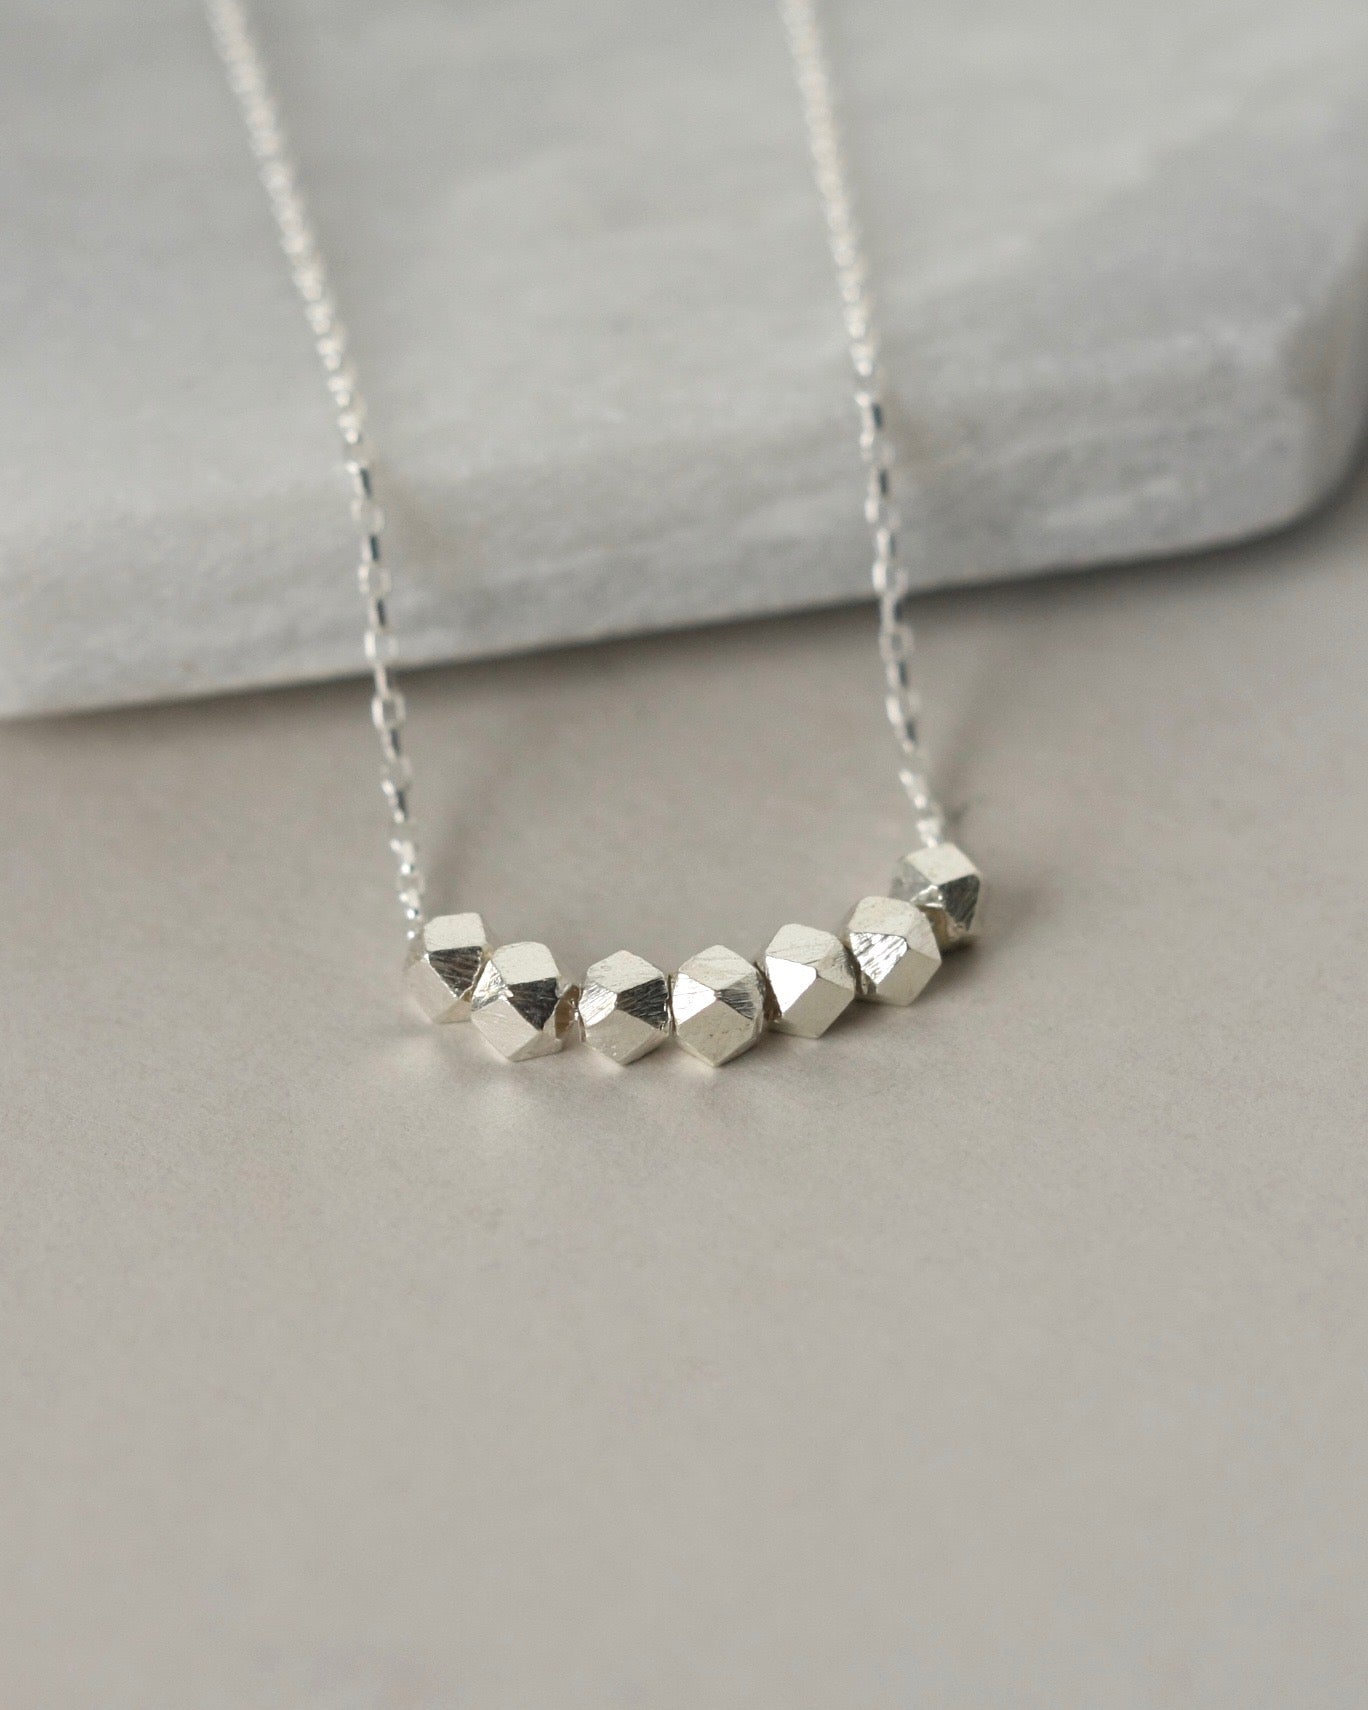 Sterling Silver Faceted Nugget Necklace